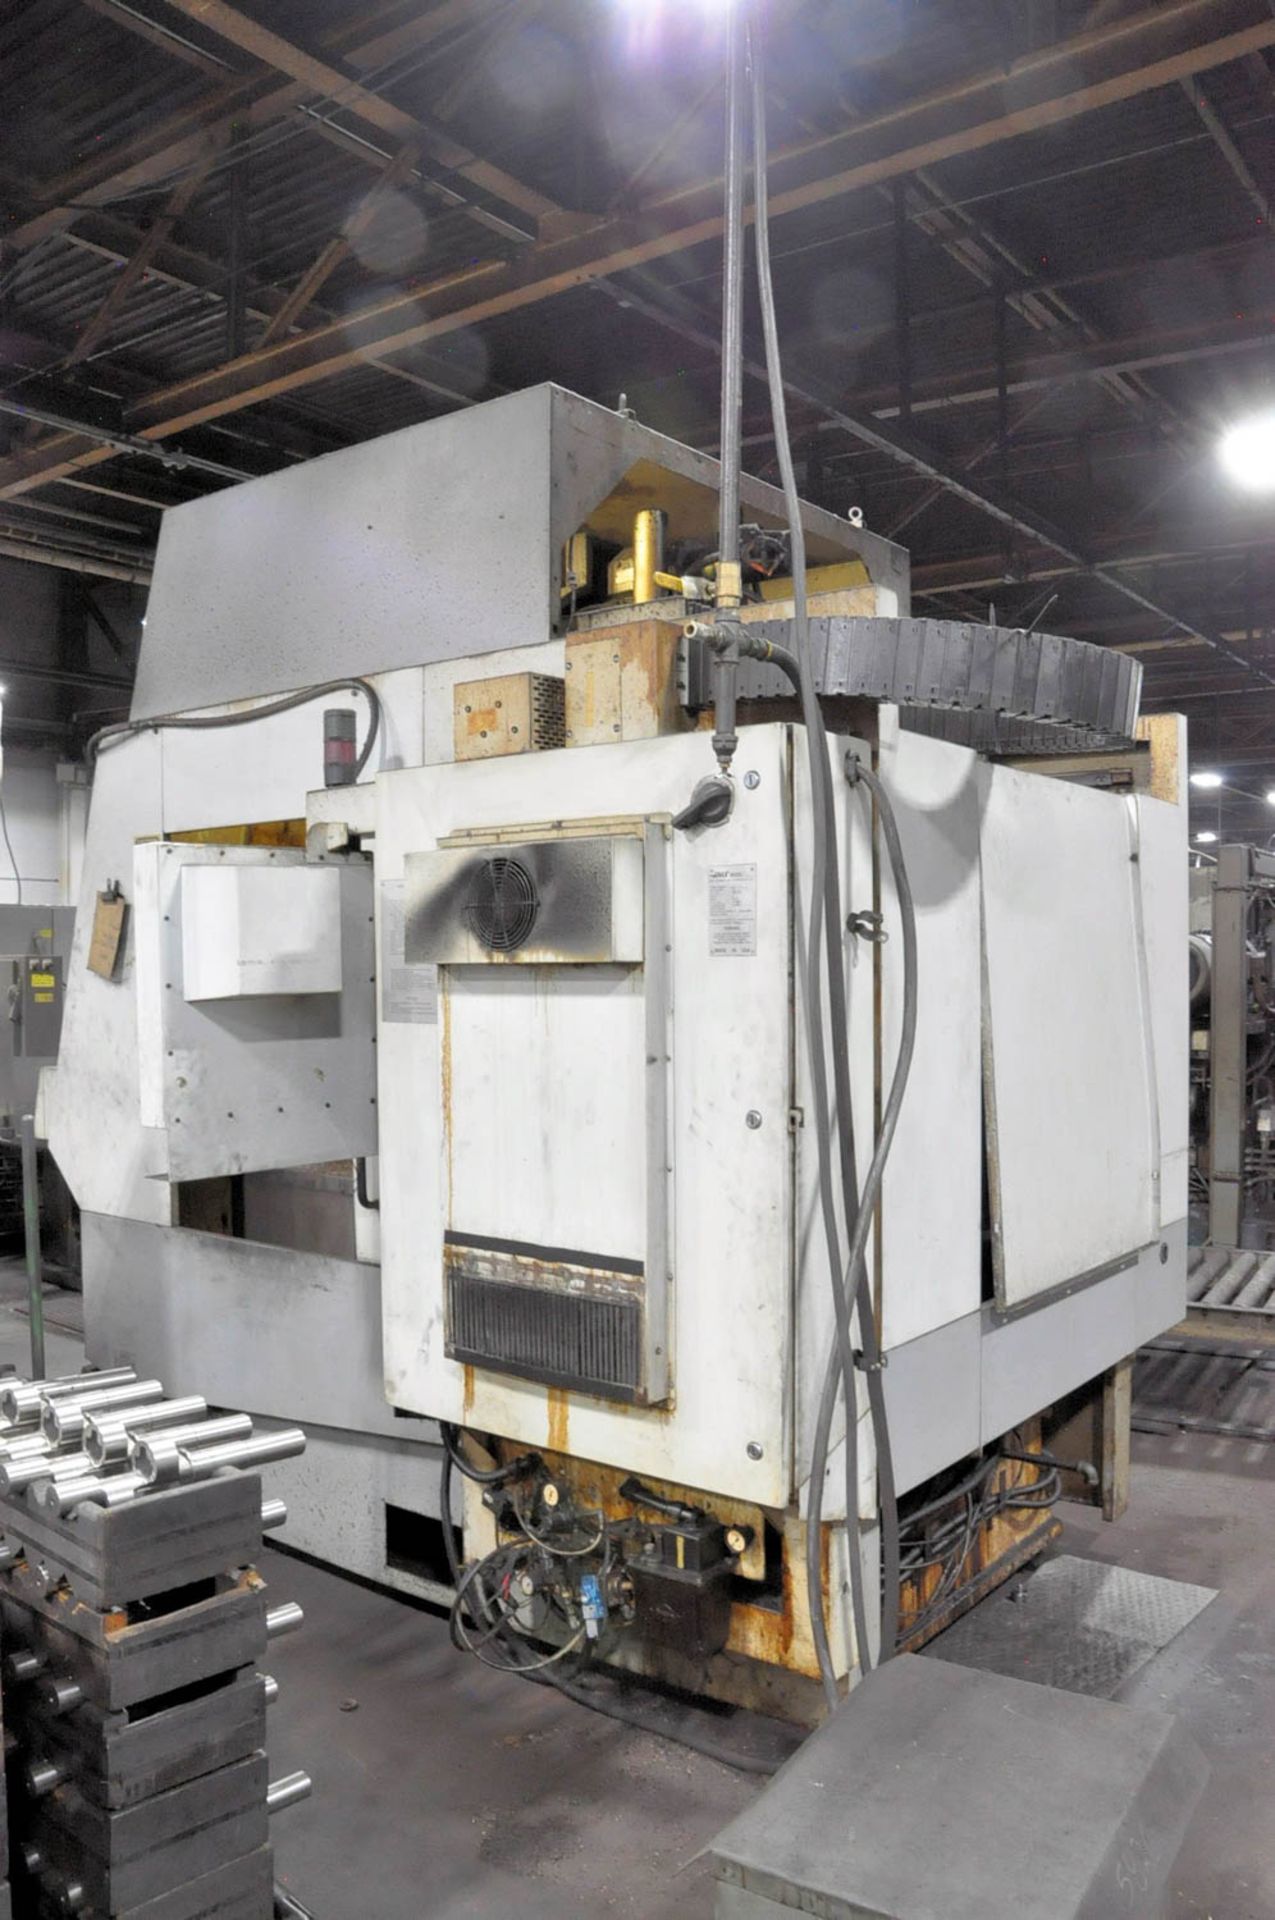 HAAS MDL. HS1, HORIZONTAL MACHINING CENTER, S/N: 50051 (1995), 18" X 20" T-SLOTTED WORK SURFACE, - Image 4 of 5